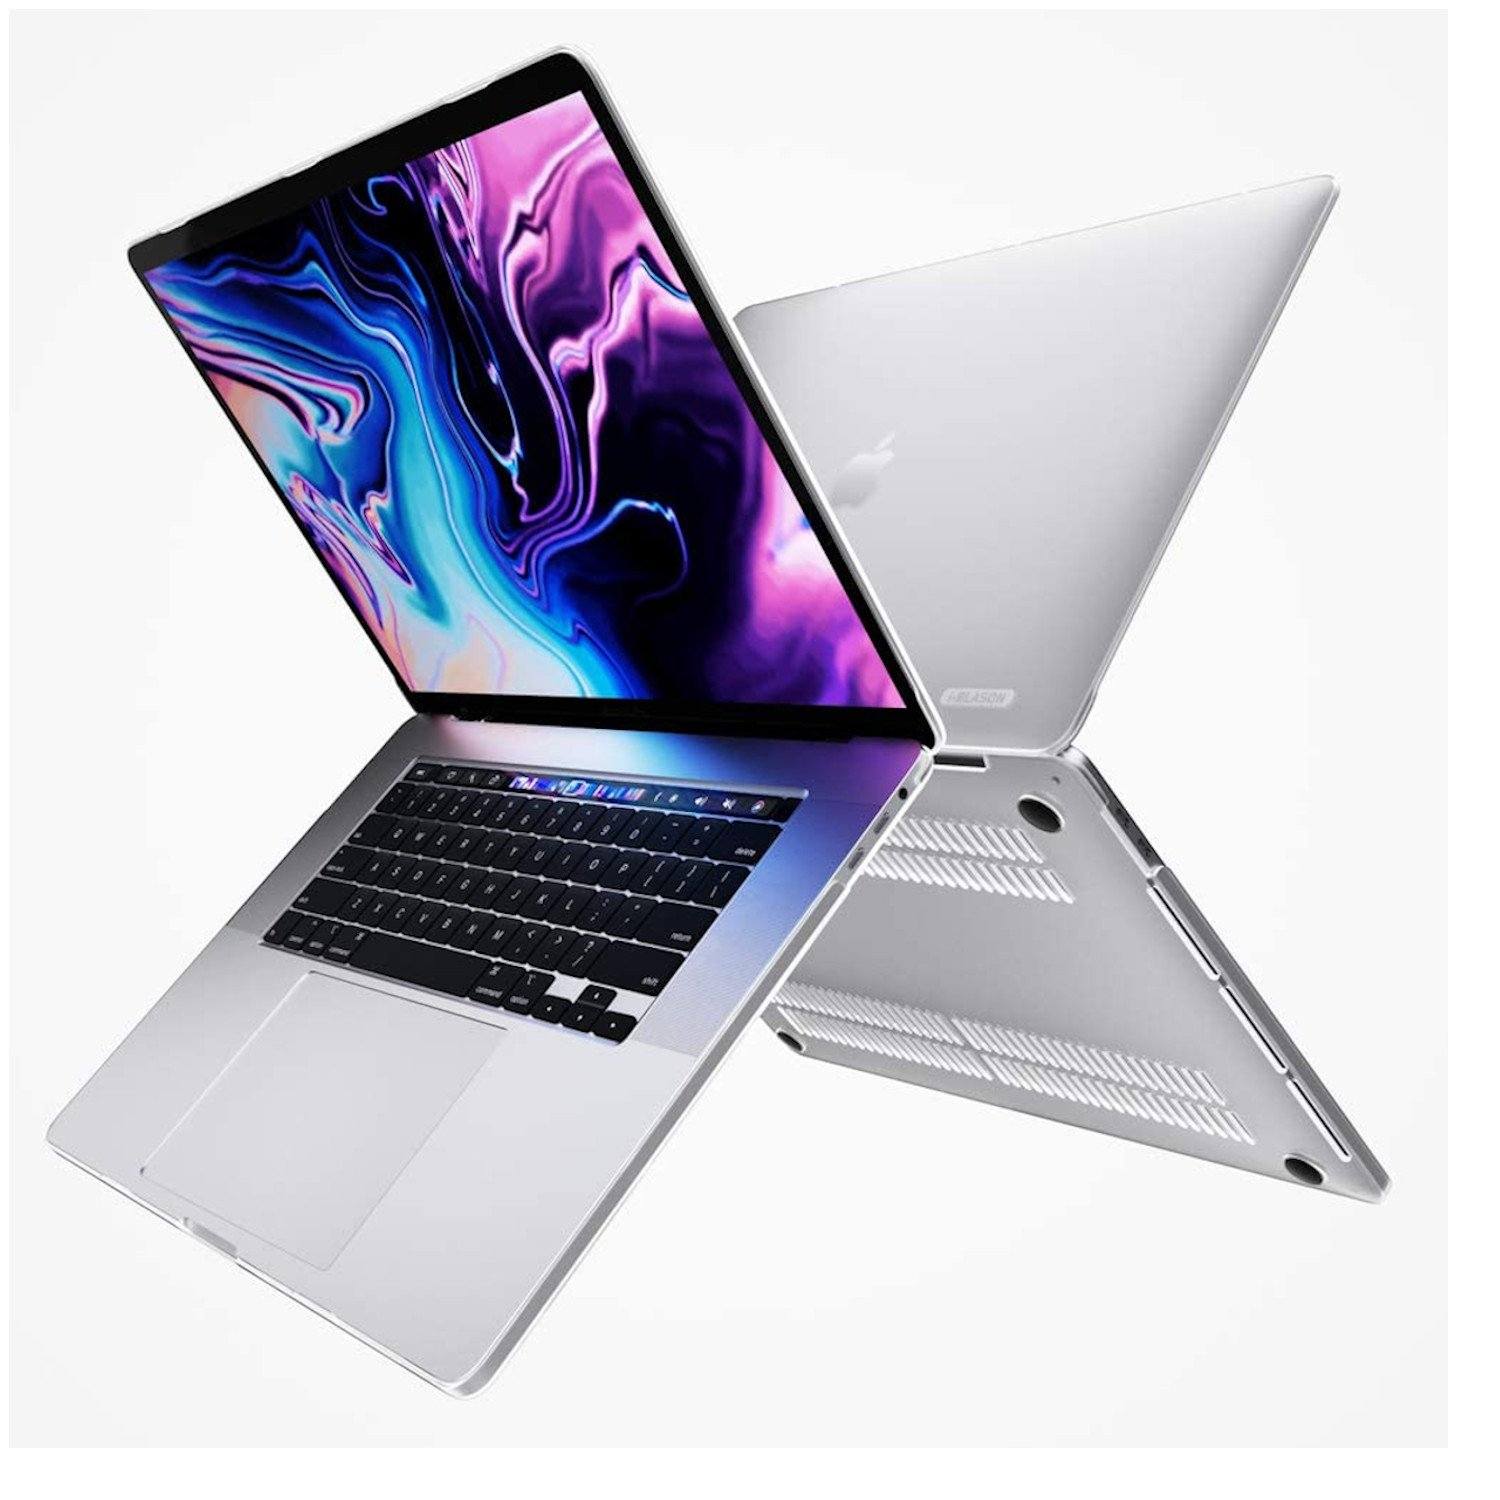 i-Blason Halo Series Hybrid Protective Case for Macbook Pro 16", Frost/Clear Macbook Case i-Blason Frost/Clear 